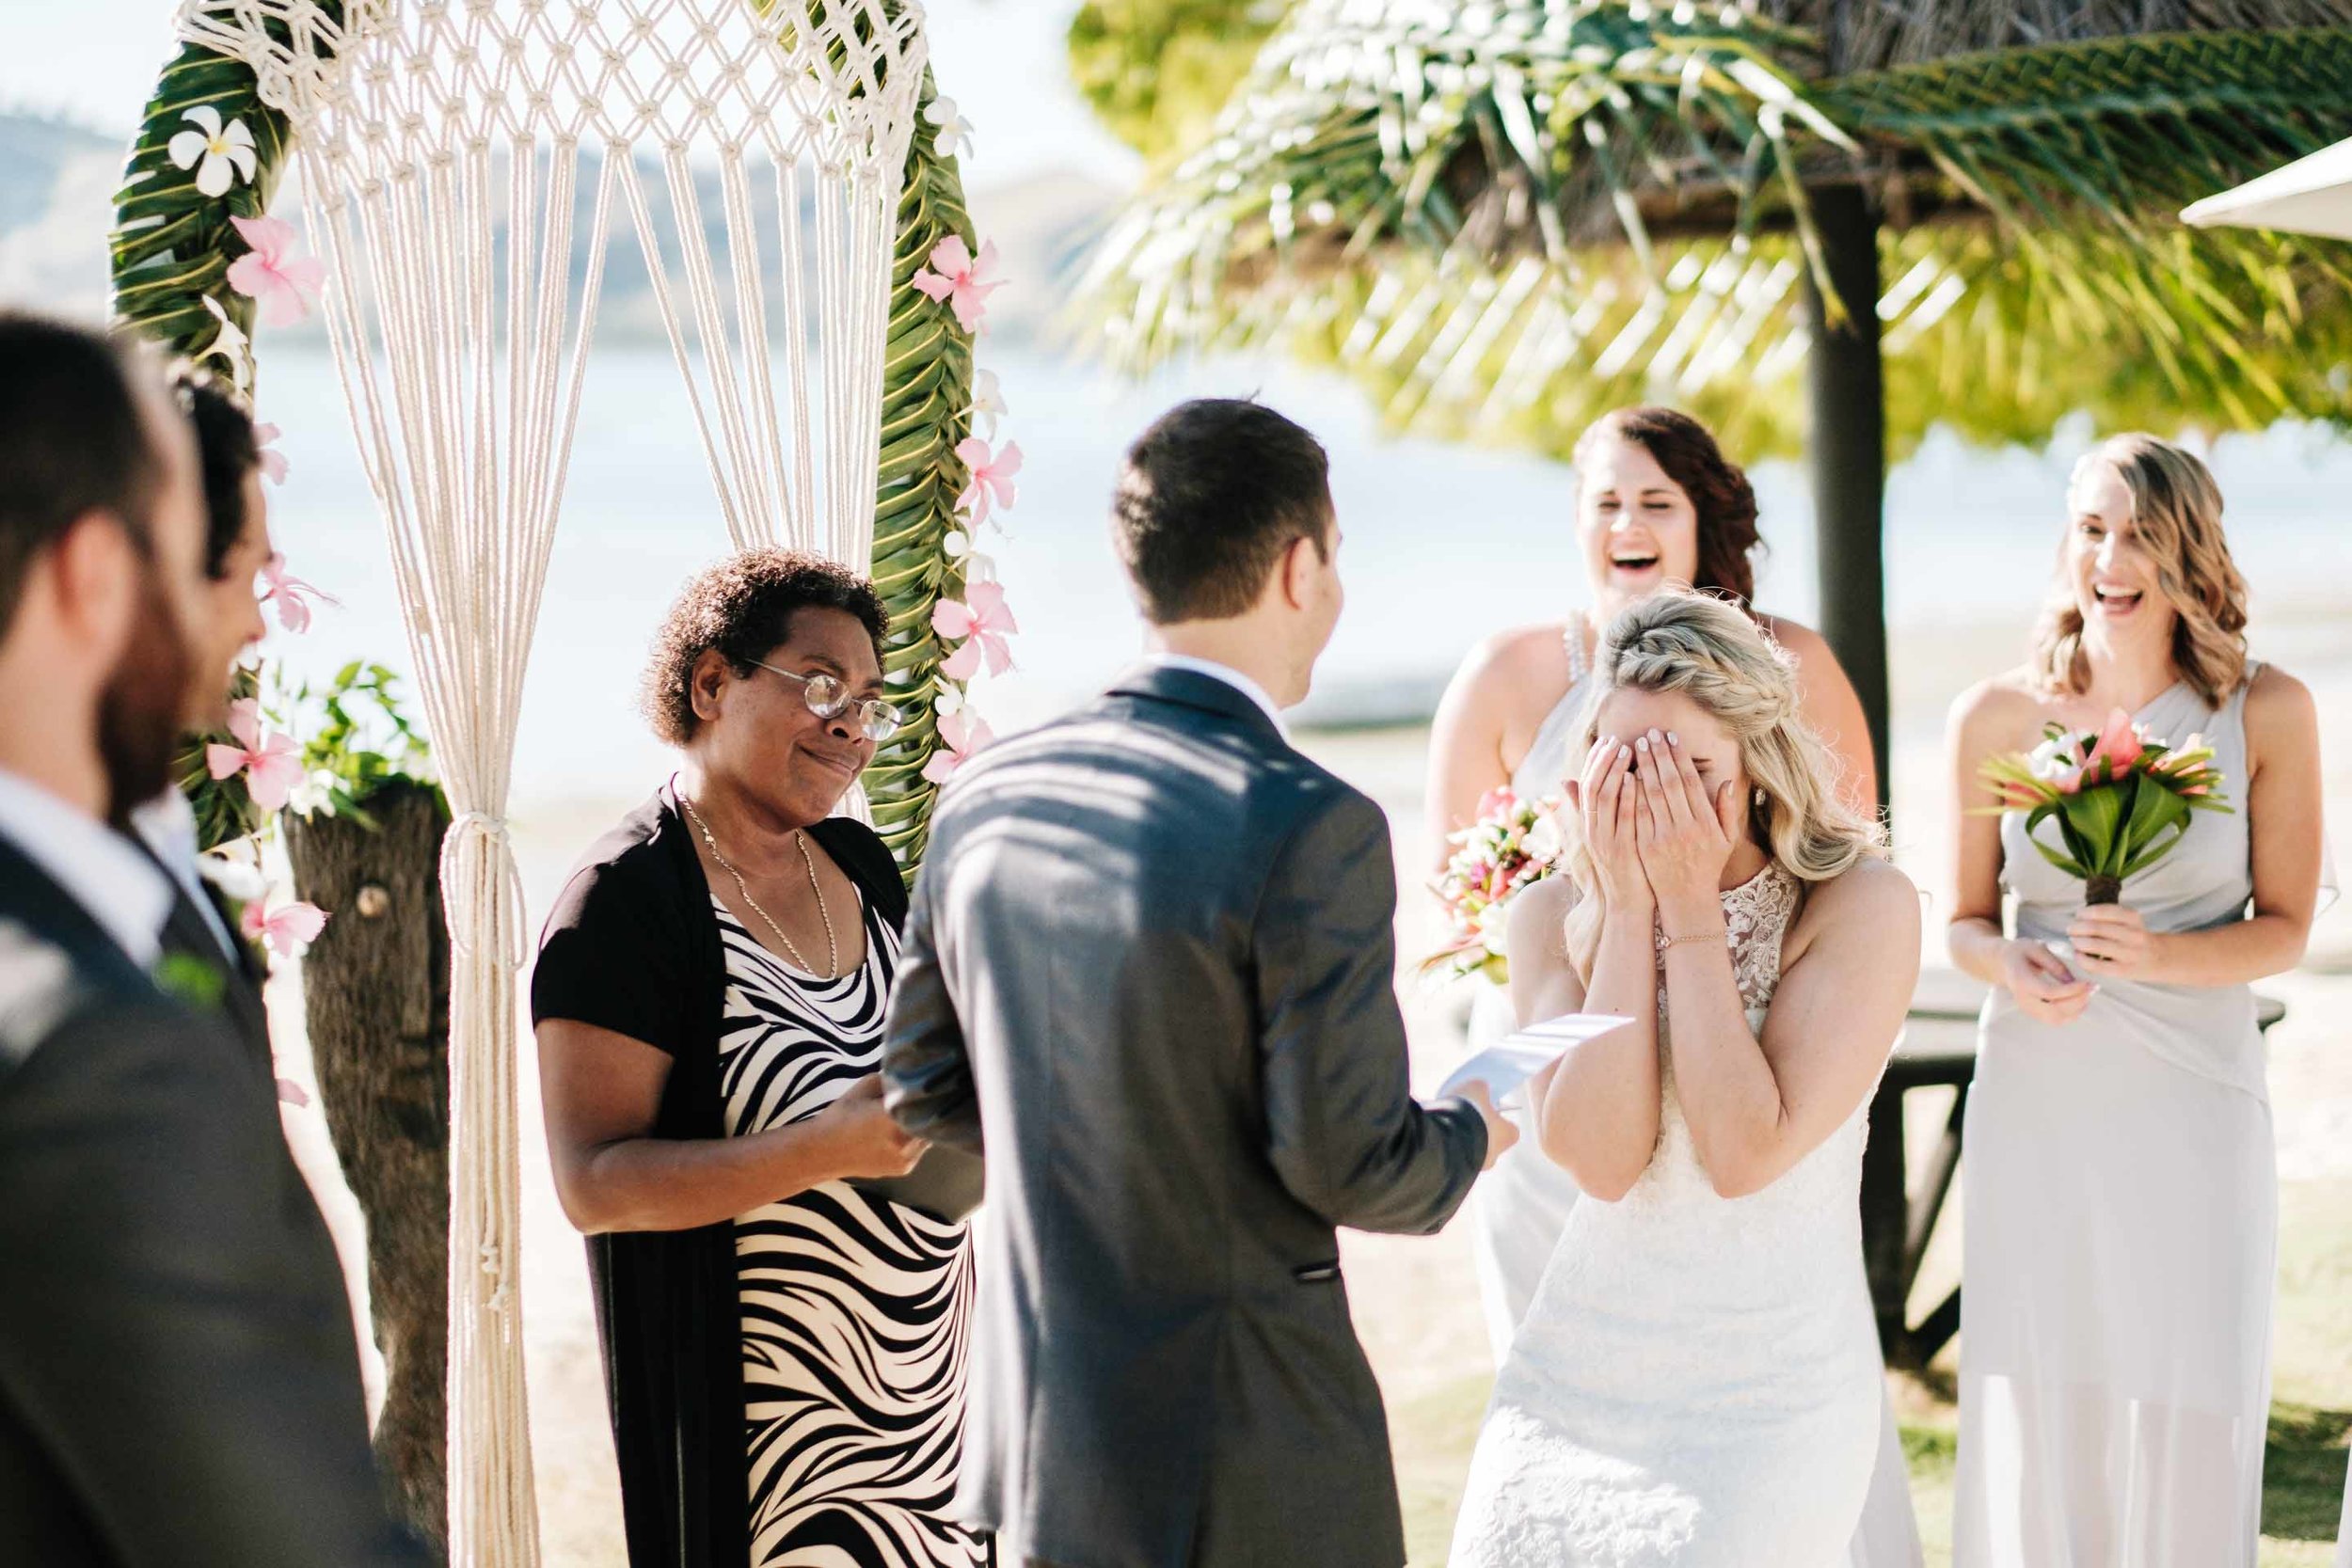 the bride reacting to the grooms vows by covering her face as she laughs